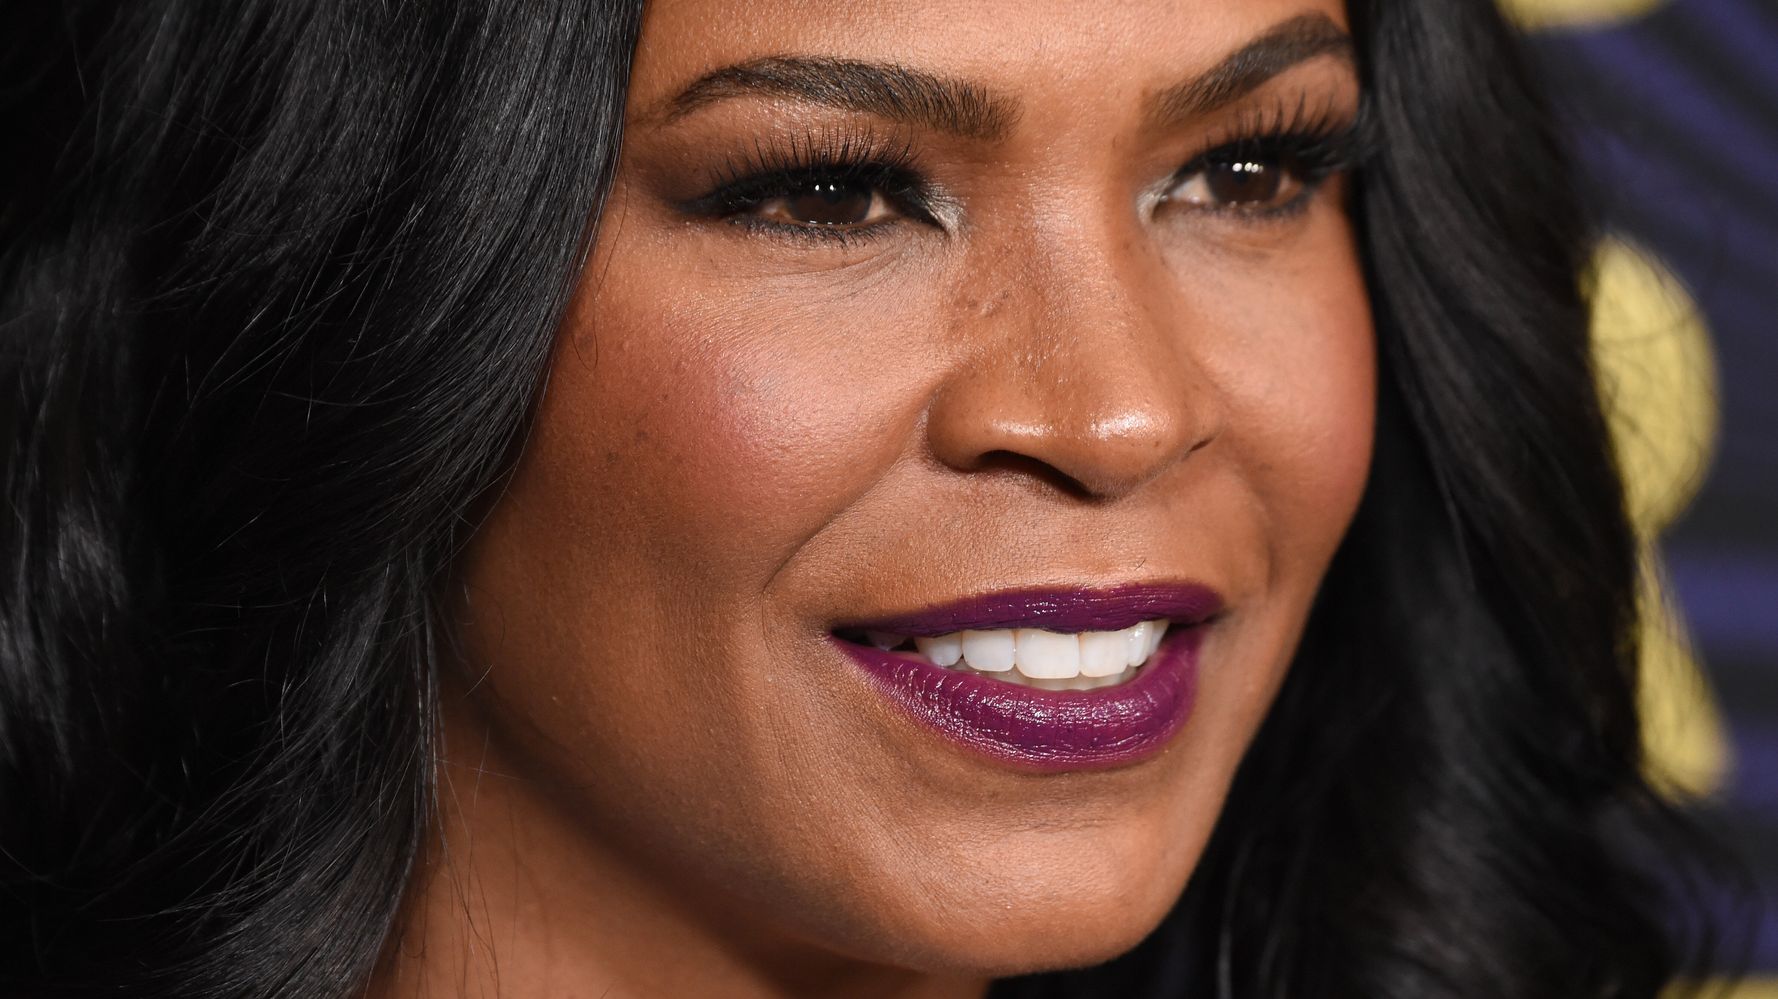 Nia Long's Fiancé Ime Udoka Speaks Out After Being Suspended as Coach